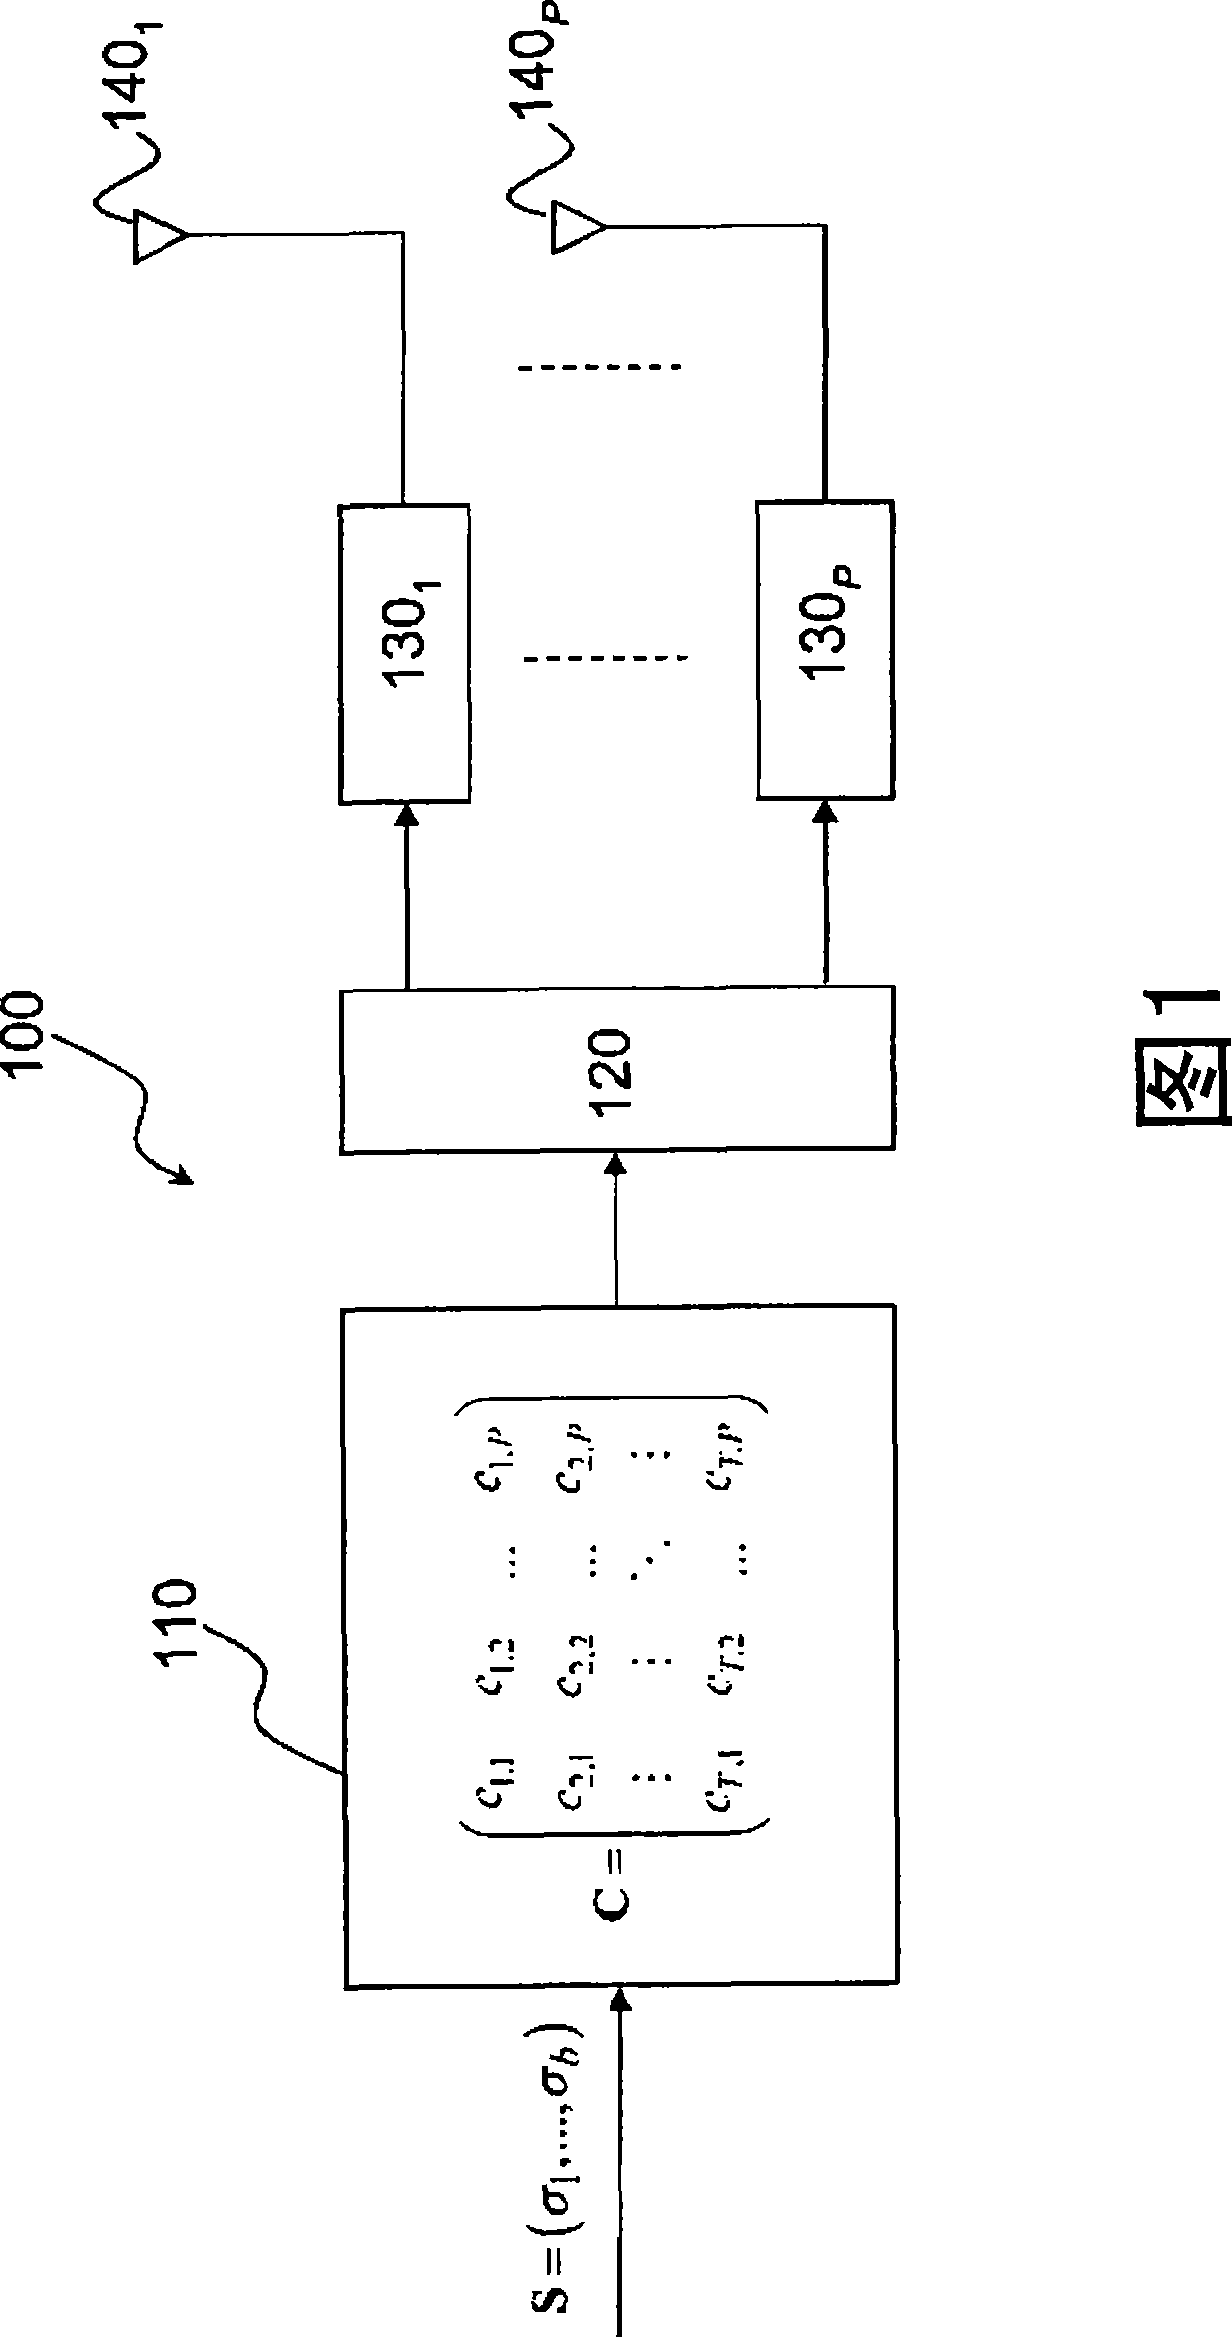 Space-time coding/decoding method for pulse type multi-antenna communication system